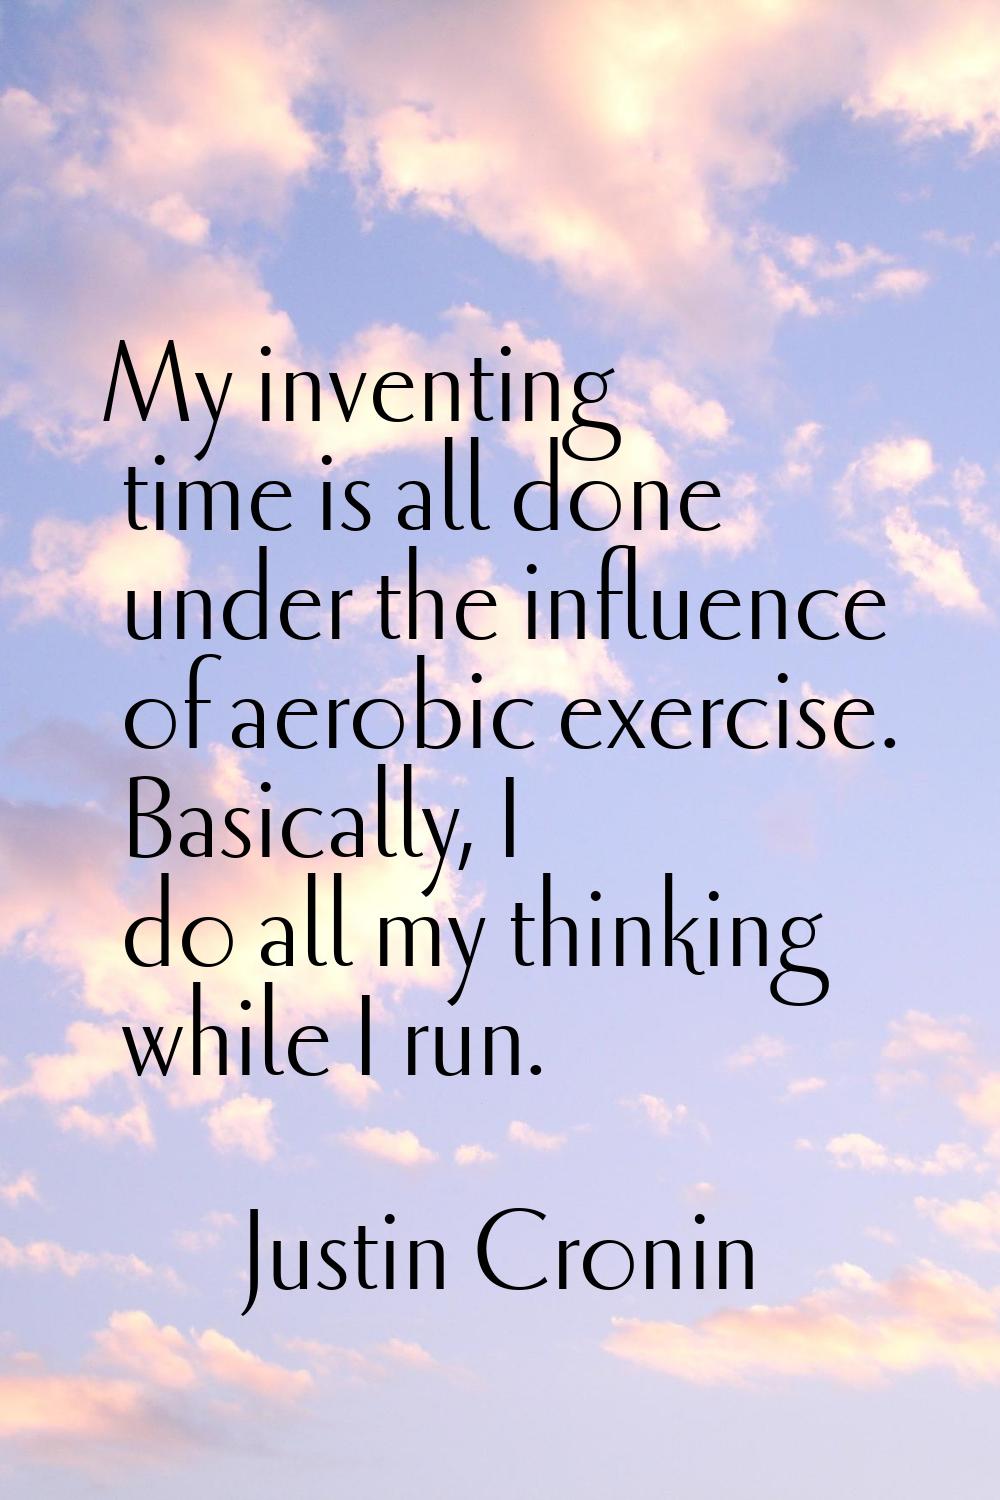 My inventing time is all done under the influence of aerobic exercise. Basically, I do all my think